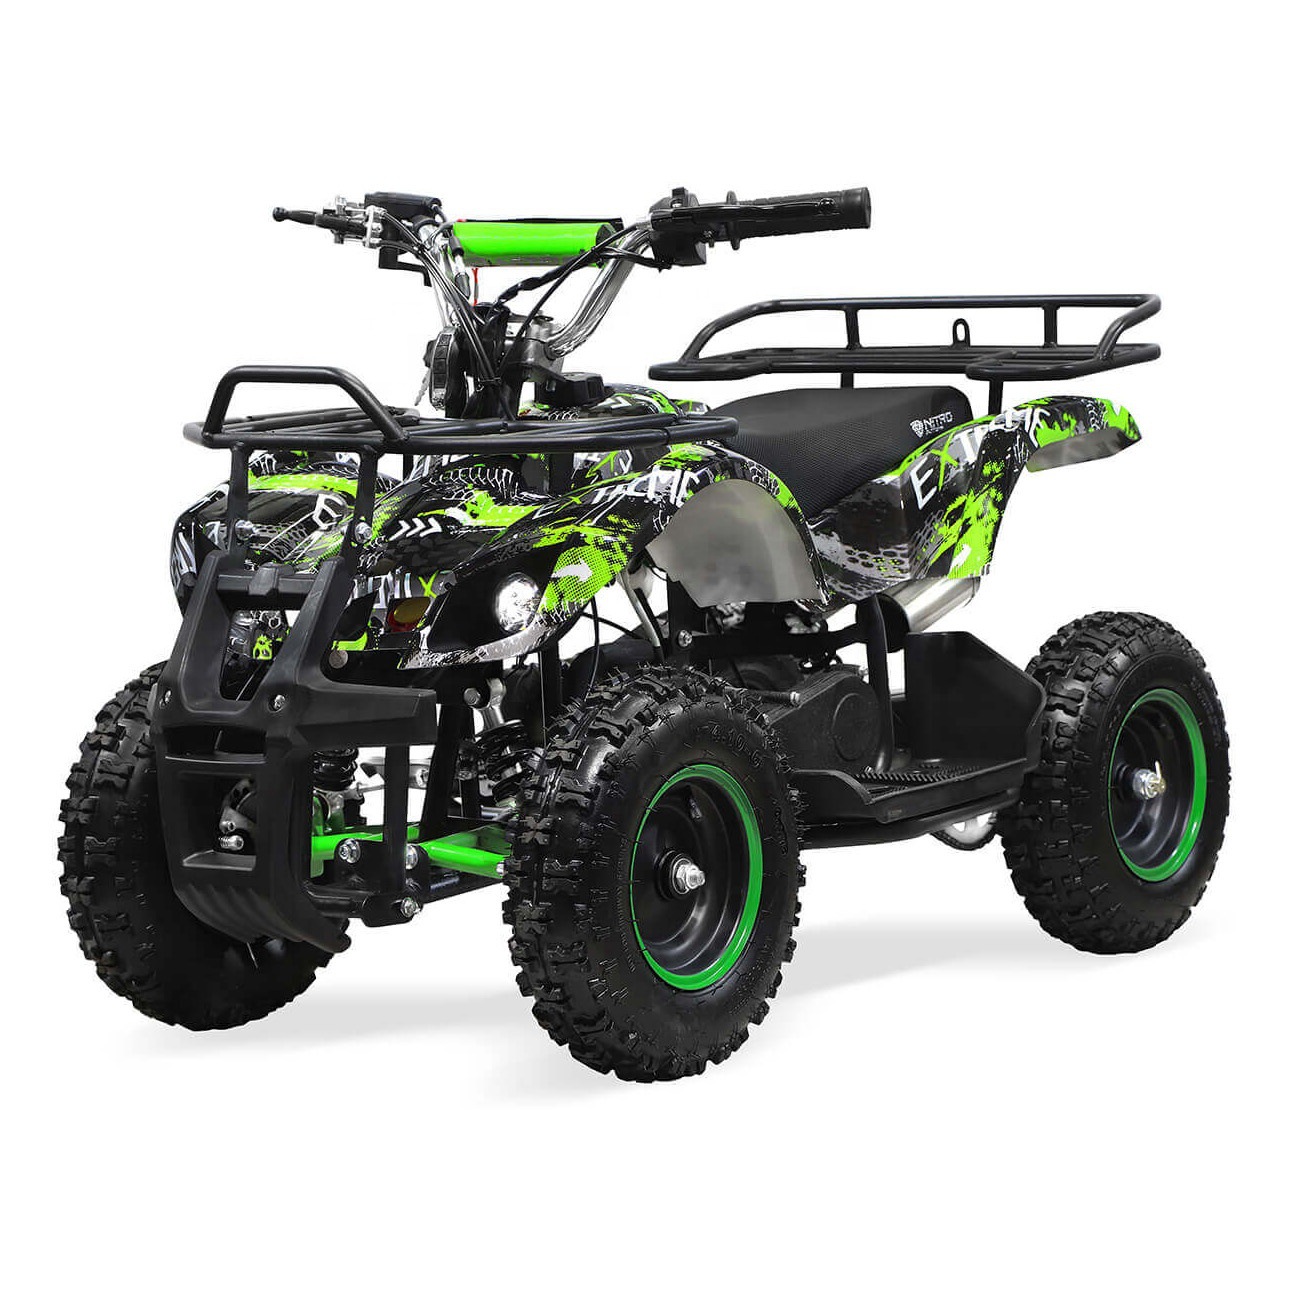 How to choose an ATV?